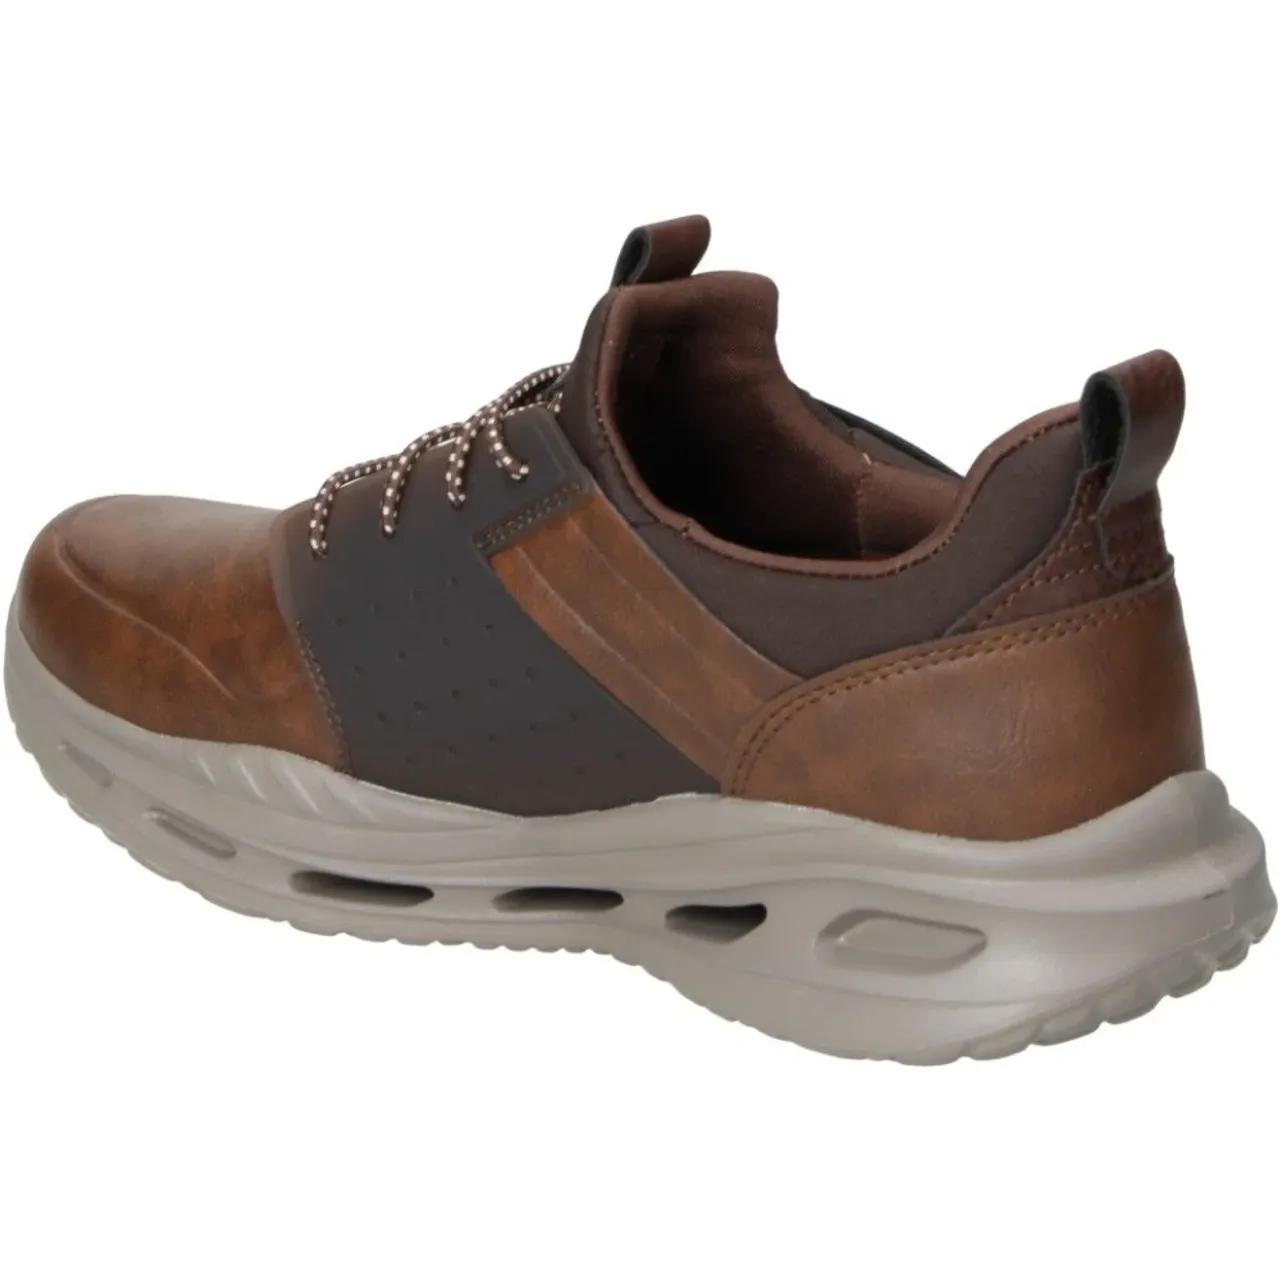 Skechers , Shoes ,Brown male, Sizes: